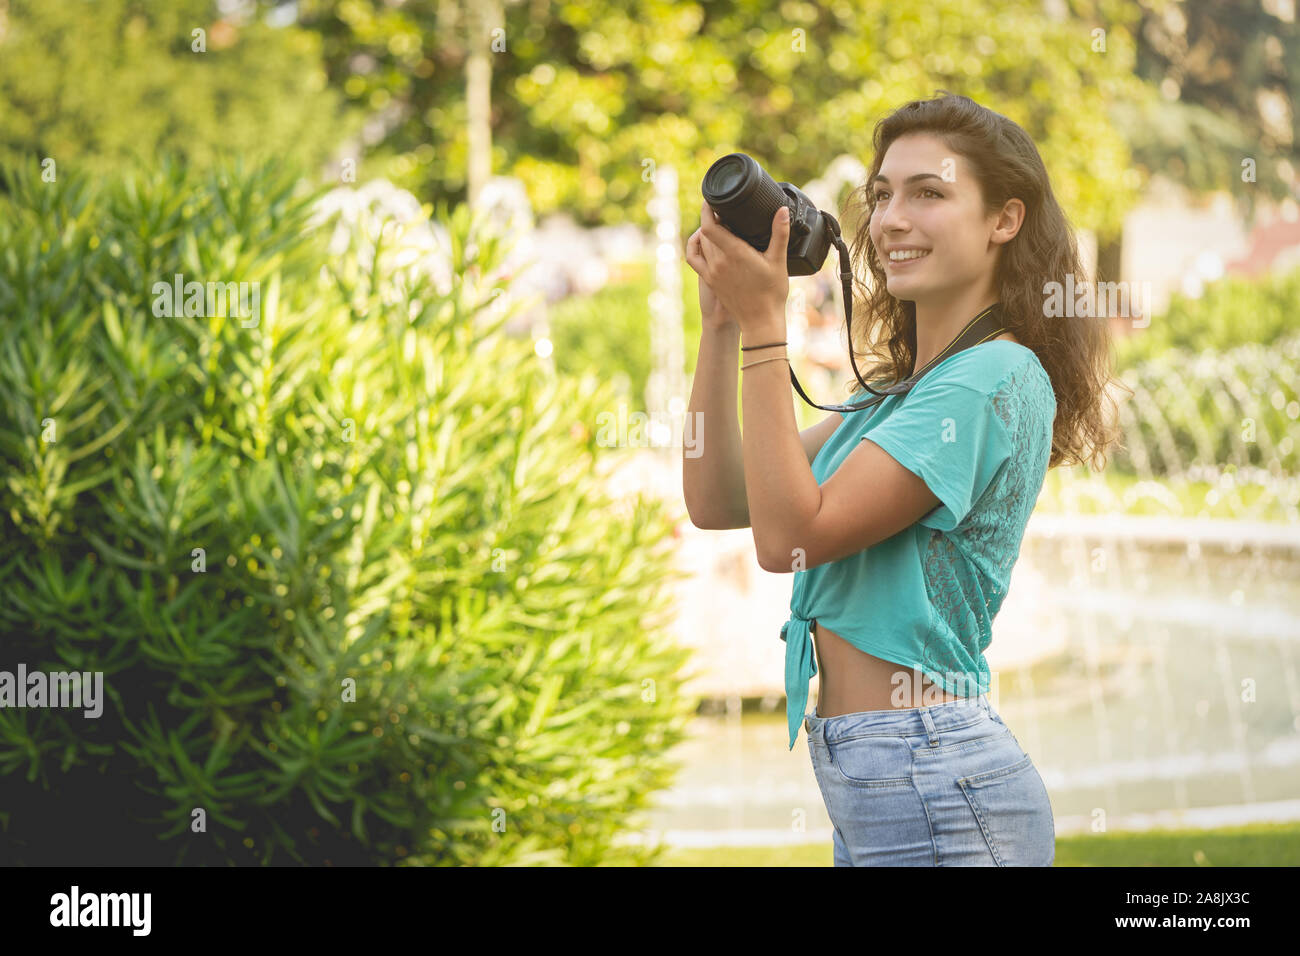 Smiling girl in an Italian city with a camera in her hand.  Stock Photo